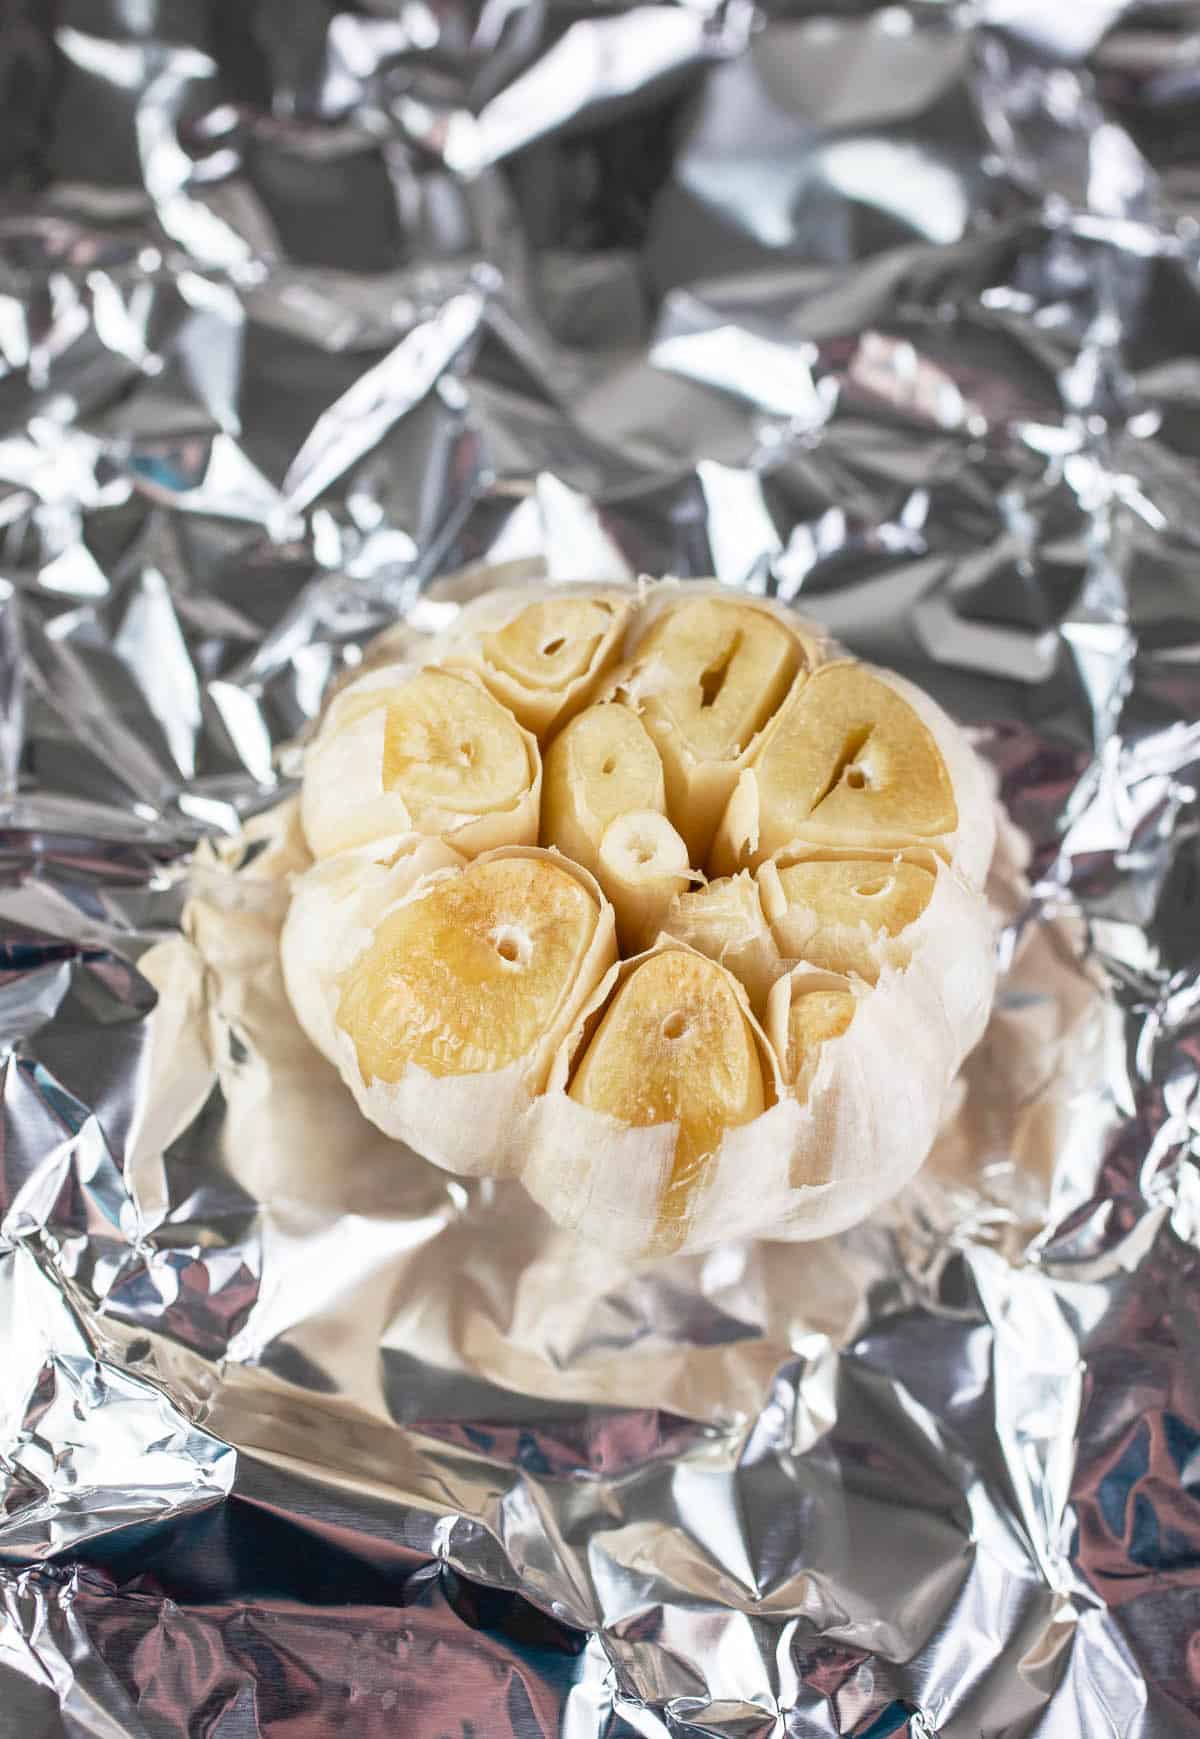 Roasted head of garlic on tinfoil.